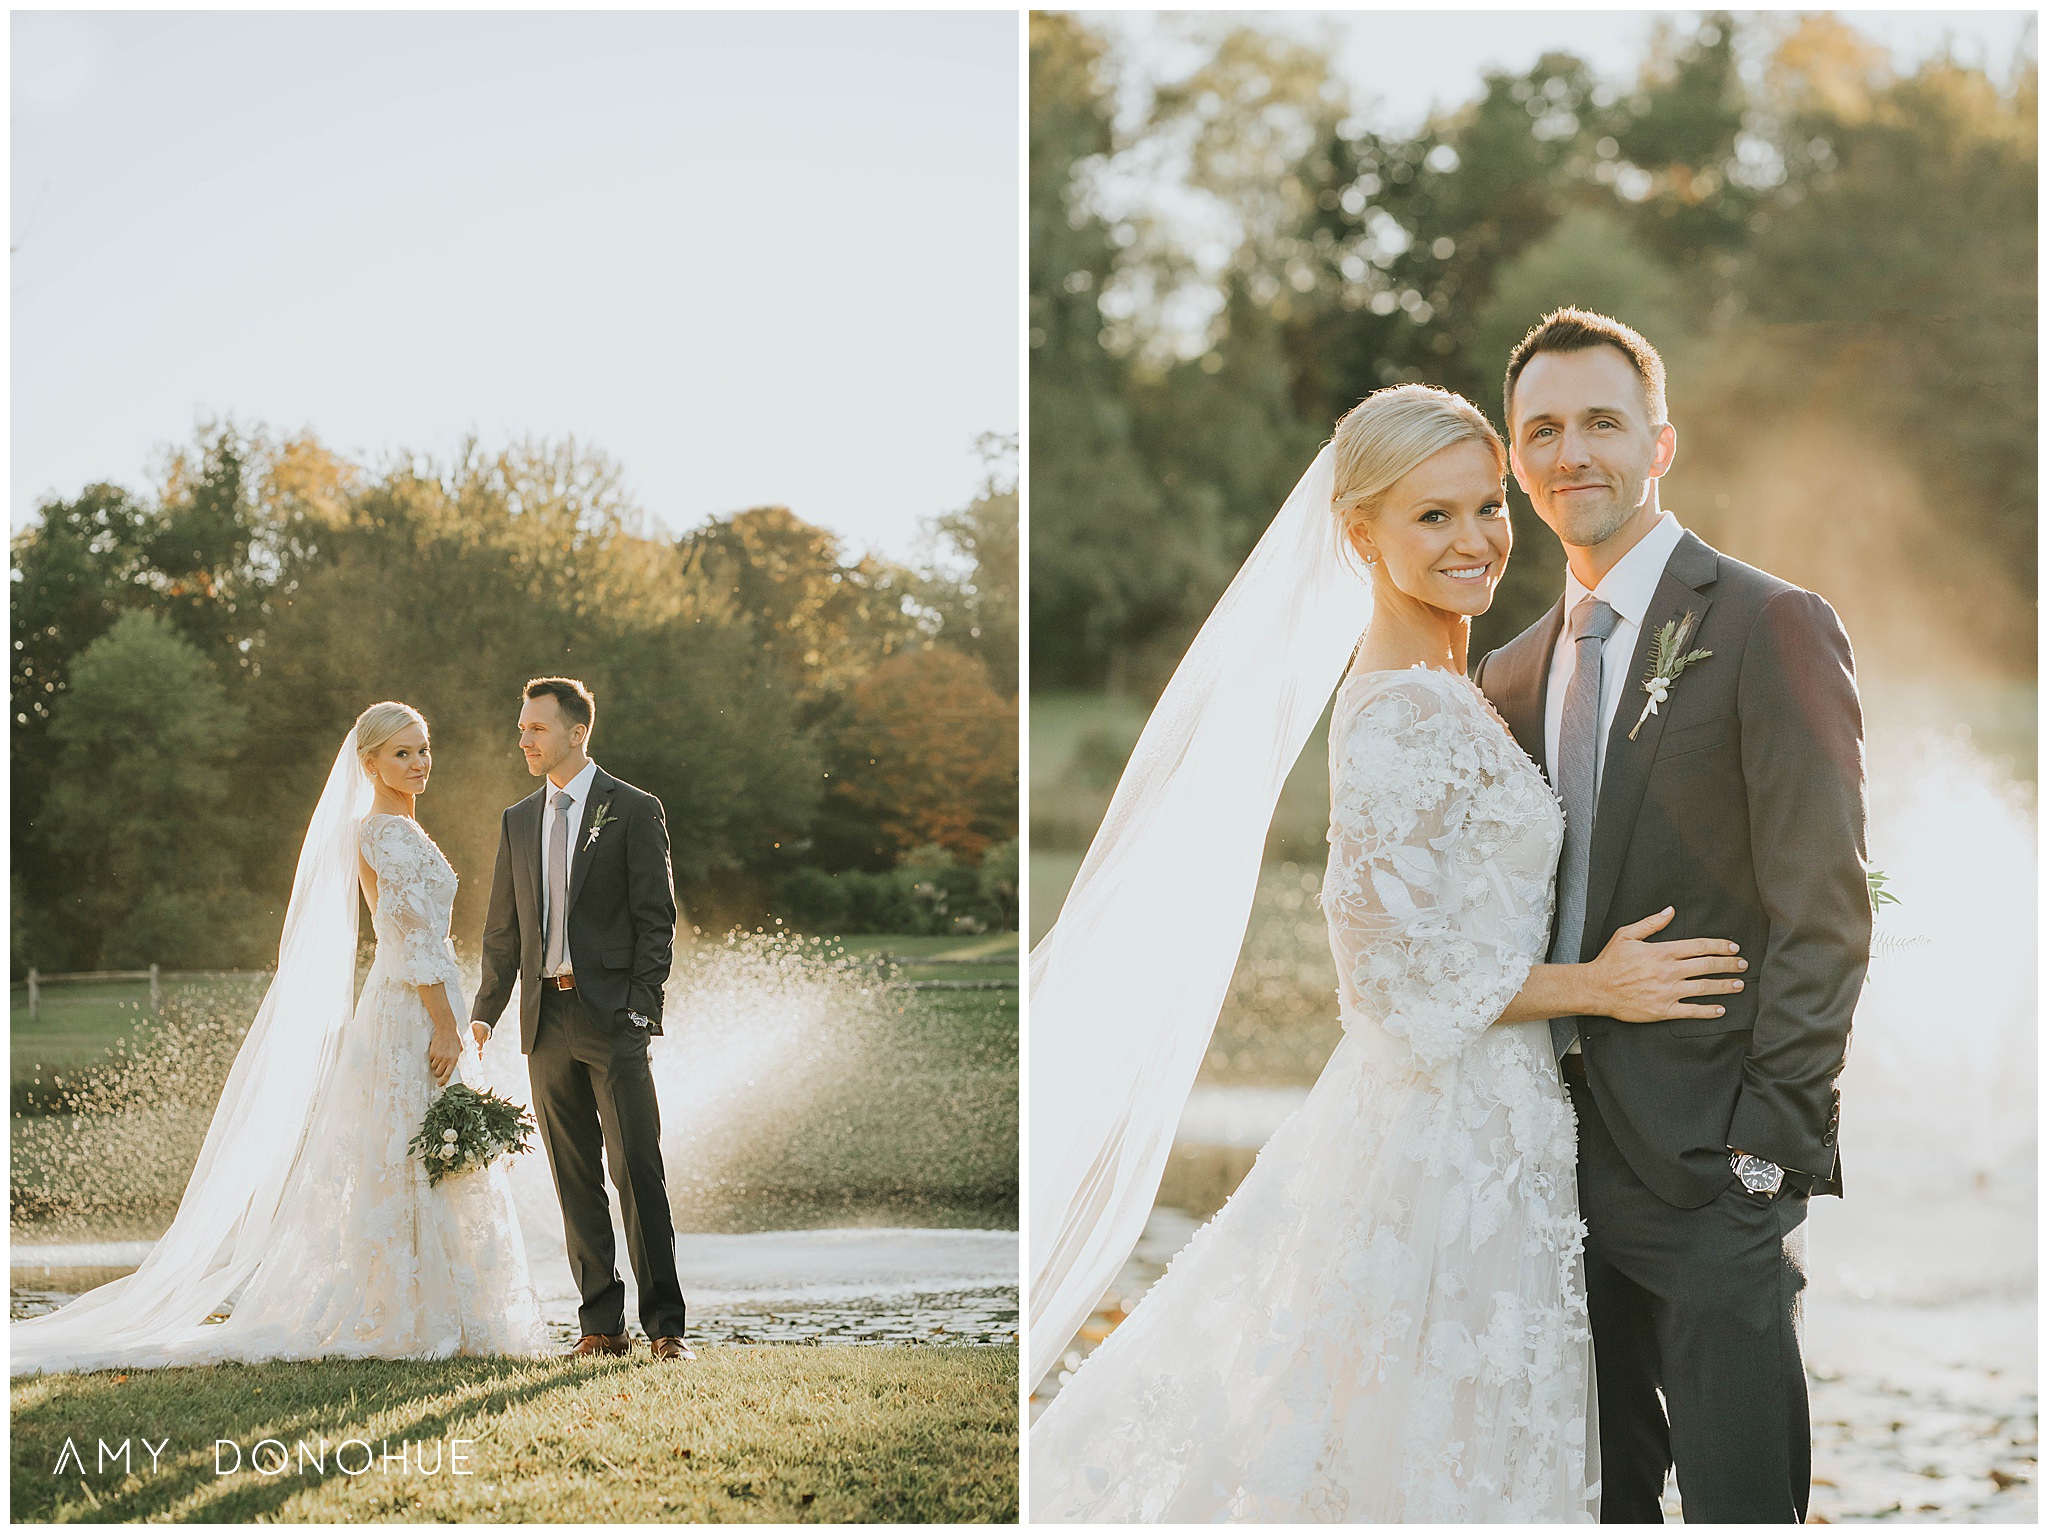 Bride and Groom golden hour portraits at the Equinox Resort with florals by Jasper and Prudence | Vermont Wedding Photographer | © Amy Donohue Photography